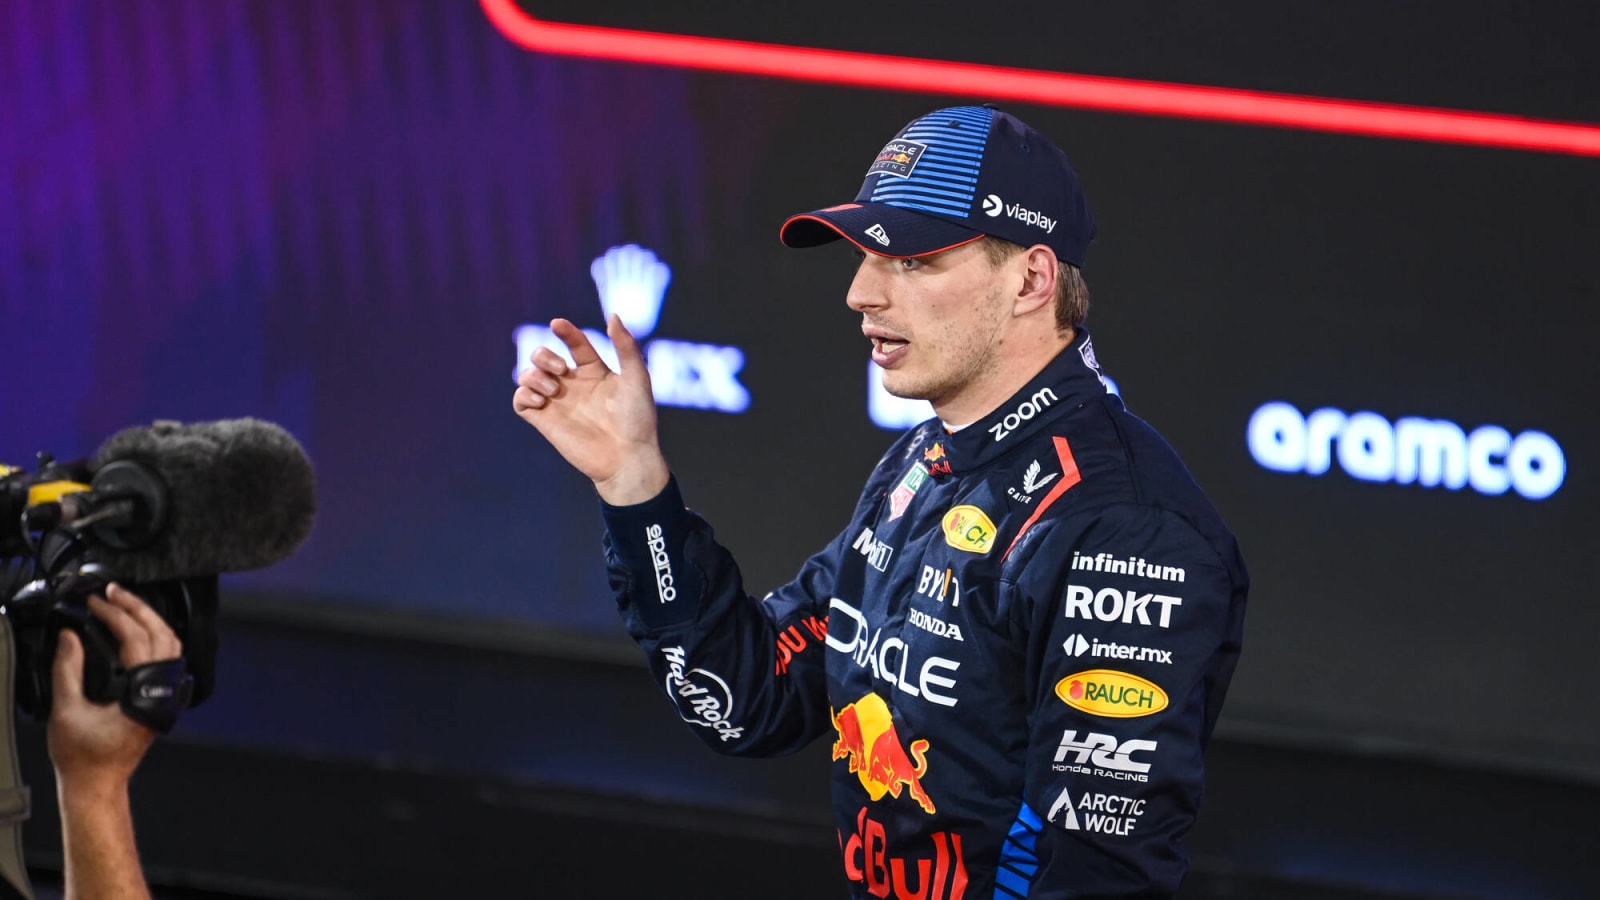 Max Verstappen rejoices narrowly clinching Pole Position from Charles Leclerc at ‘difficult’ Bahrain GP Qualifying